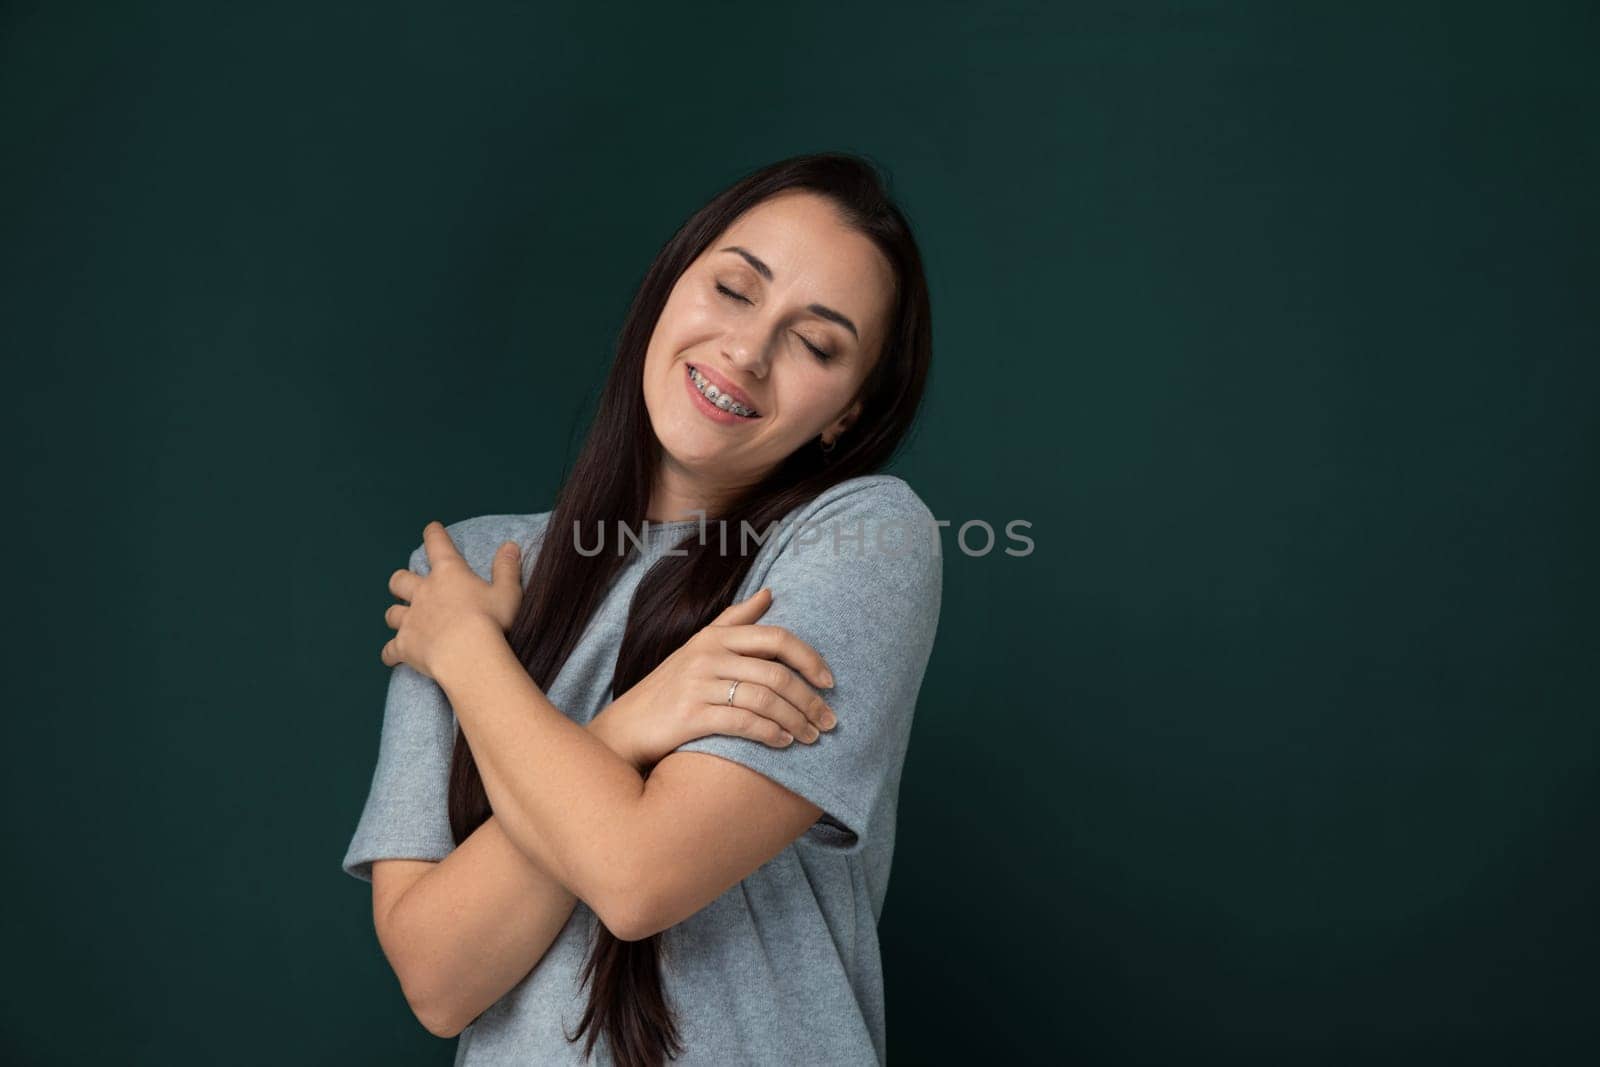 Smiling Woman With Crossed Arms by TRMK